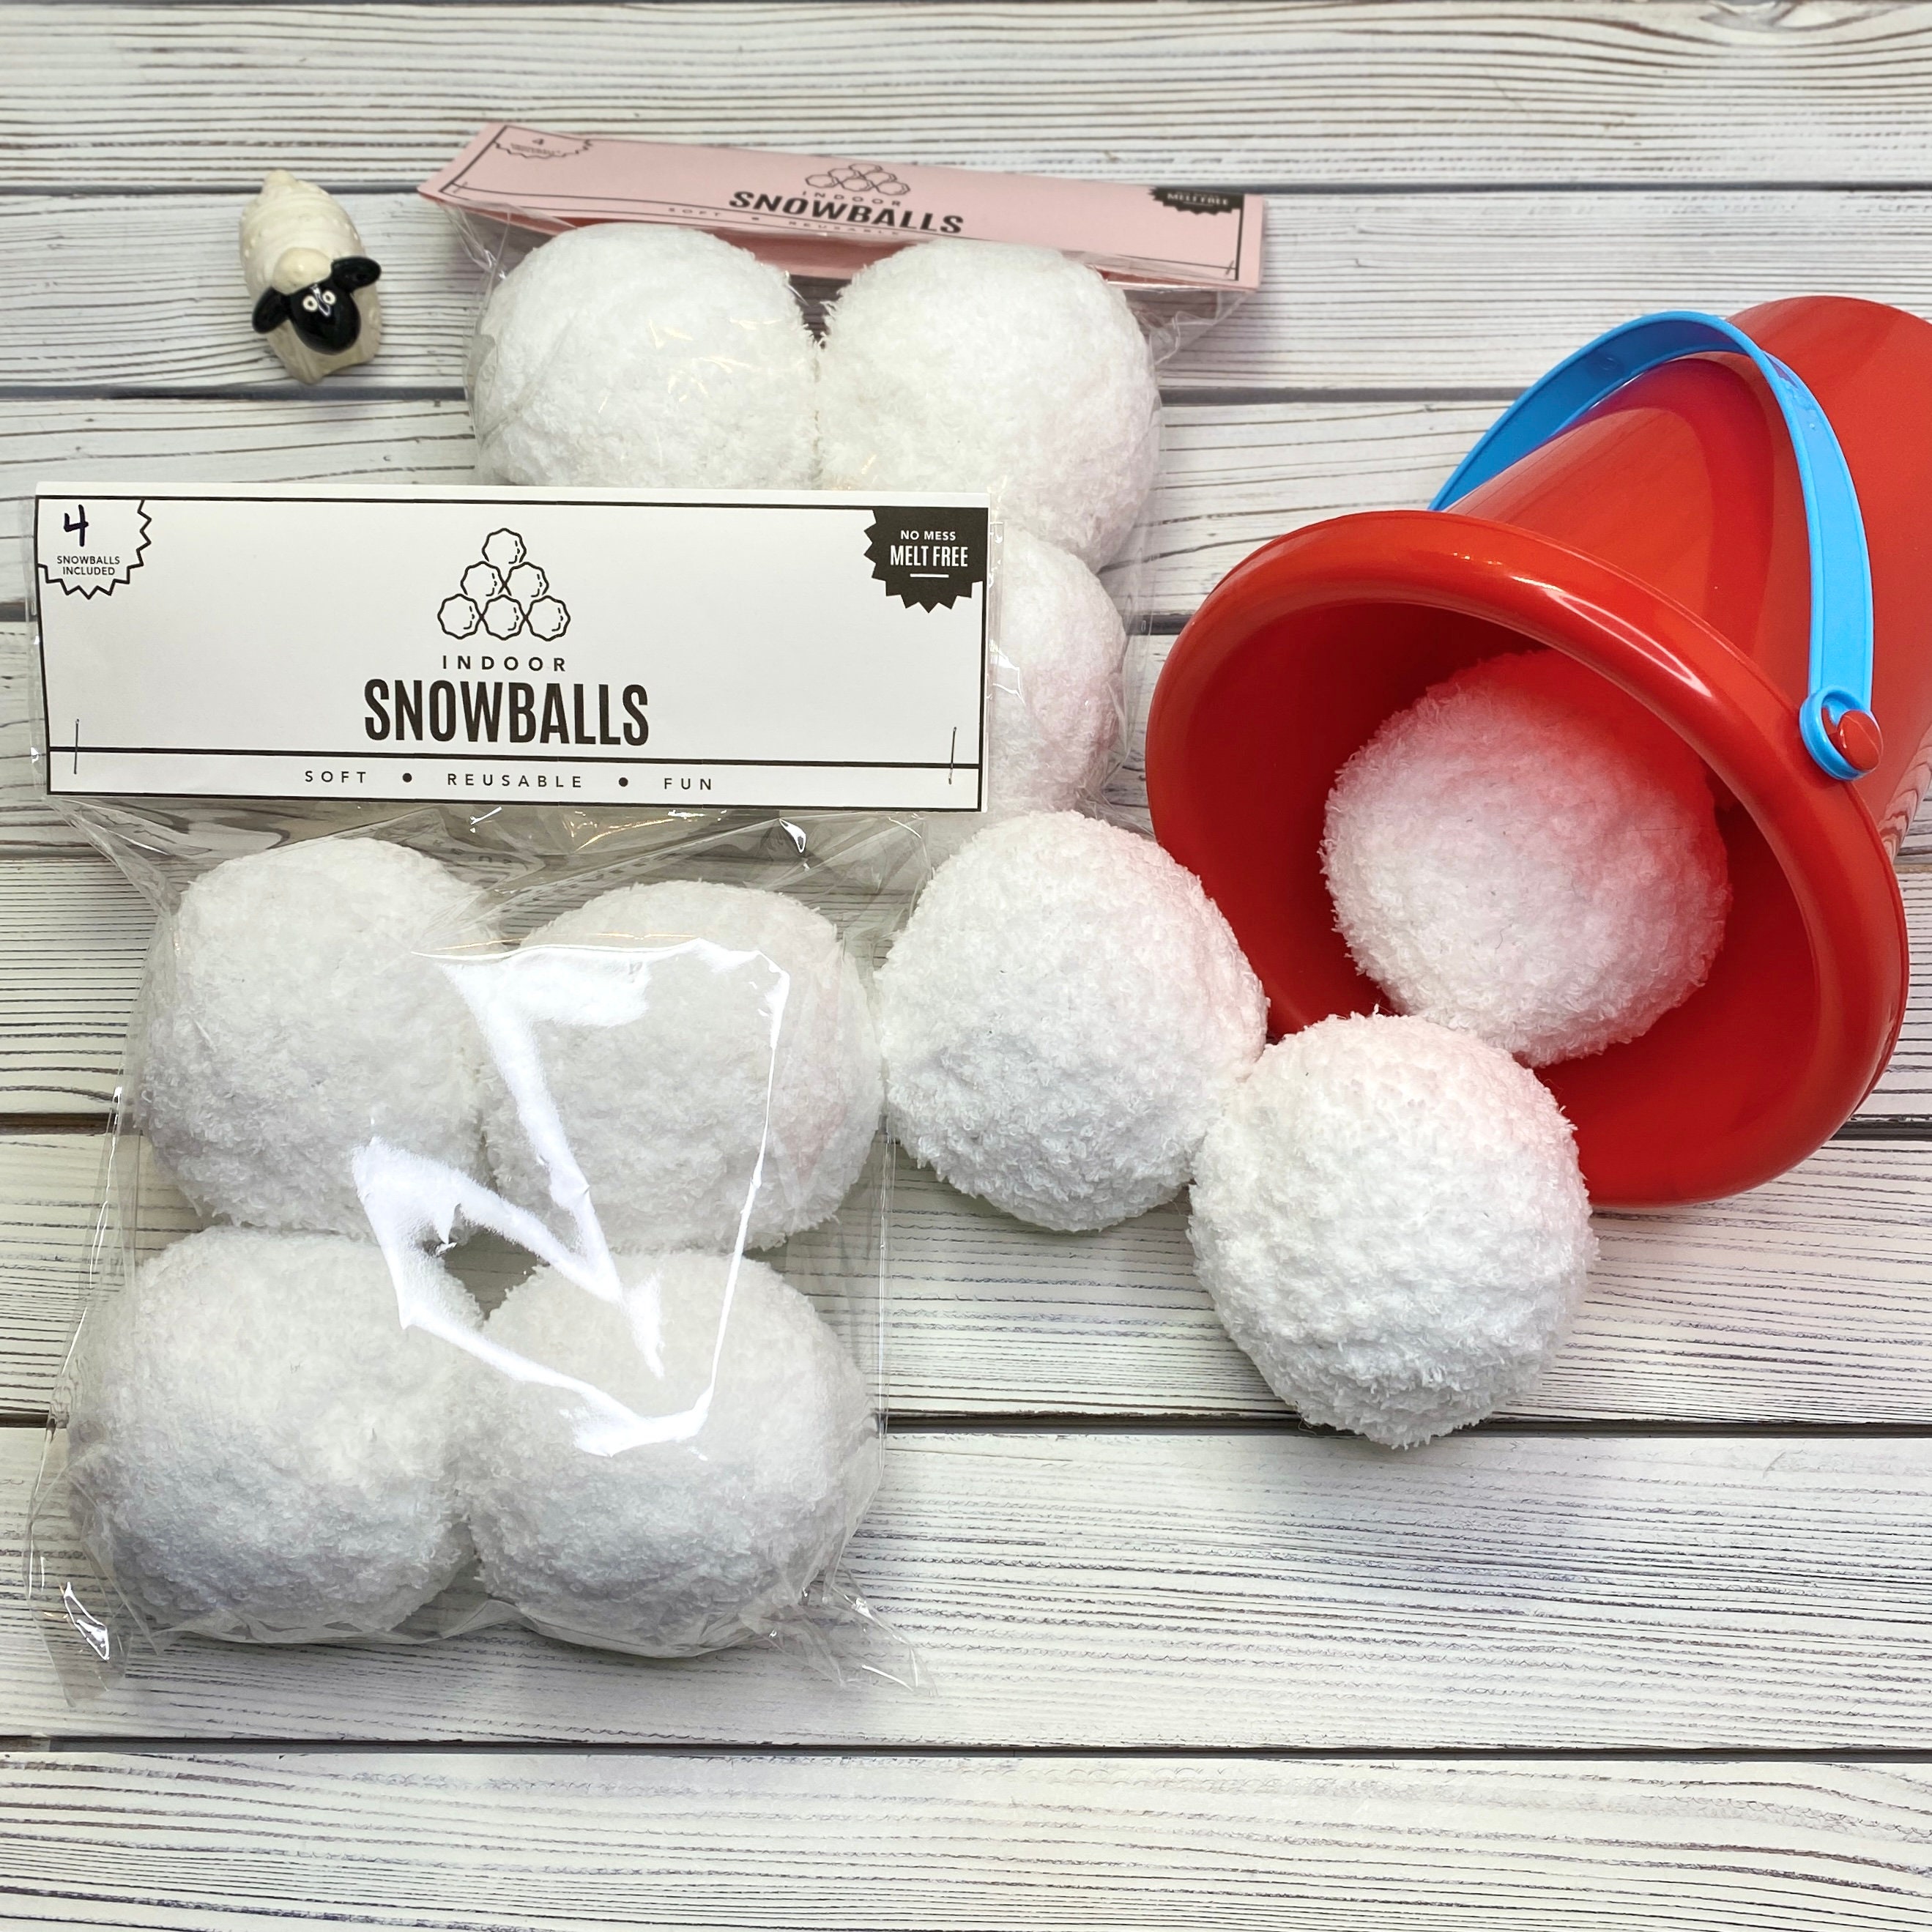 Indoor Snowballs, Plush Knit Indoor Snowballs, Christmas Party Decor,  Holiday Gifts for Kids, Winter Home Decor, Georgia Snowballs 